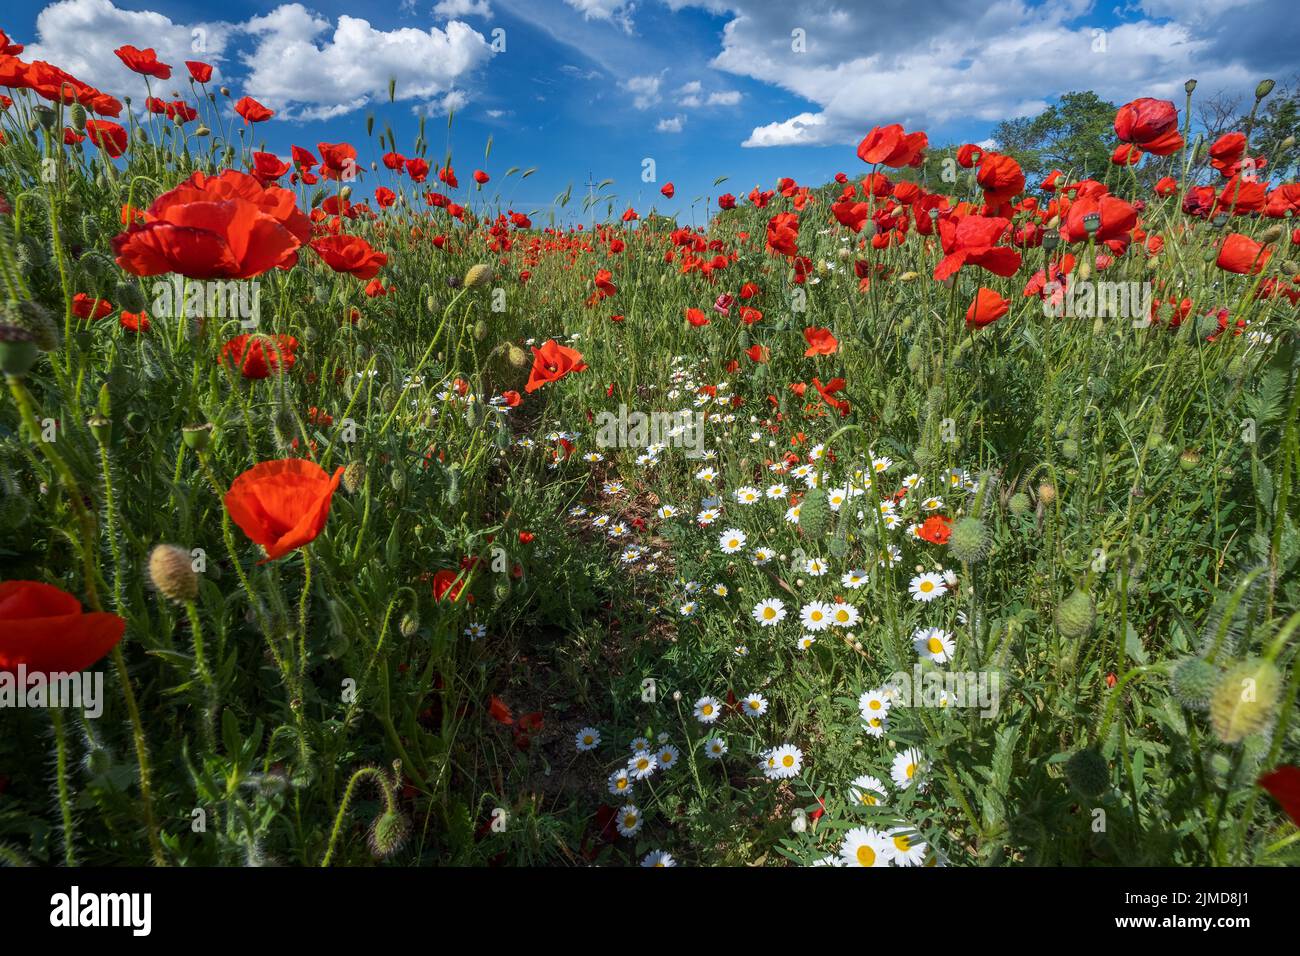 Field of poppy flowers and daisies Stock Photo